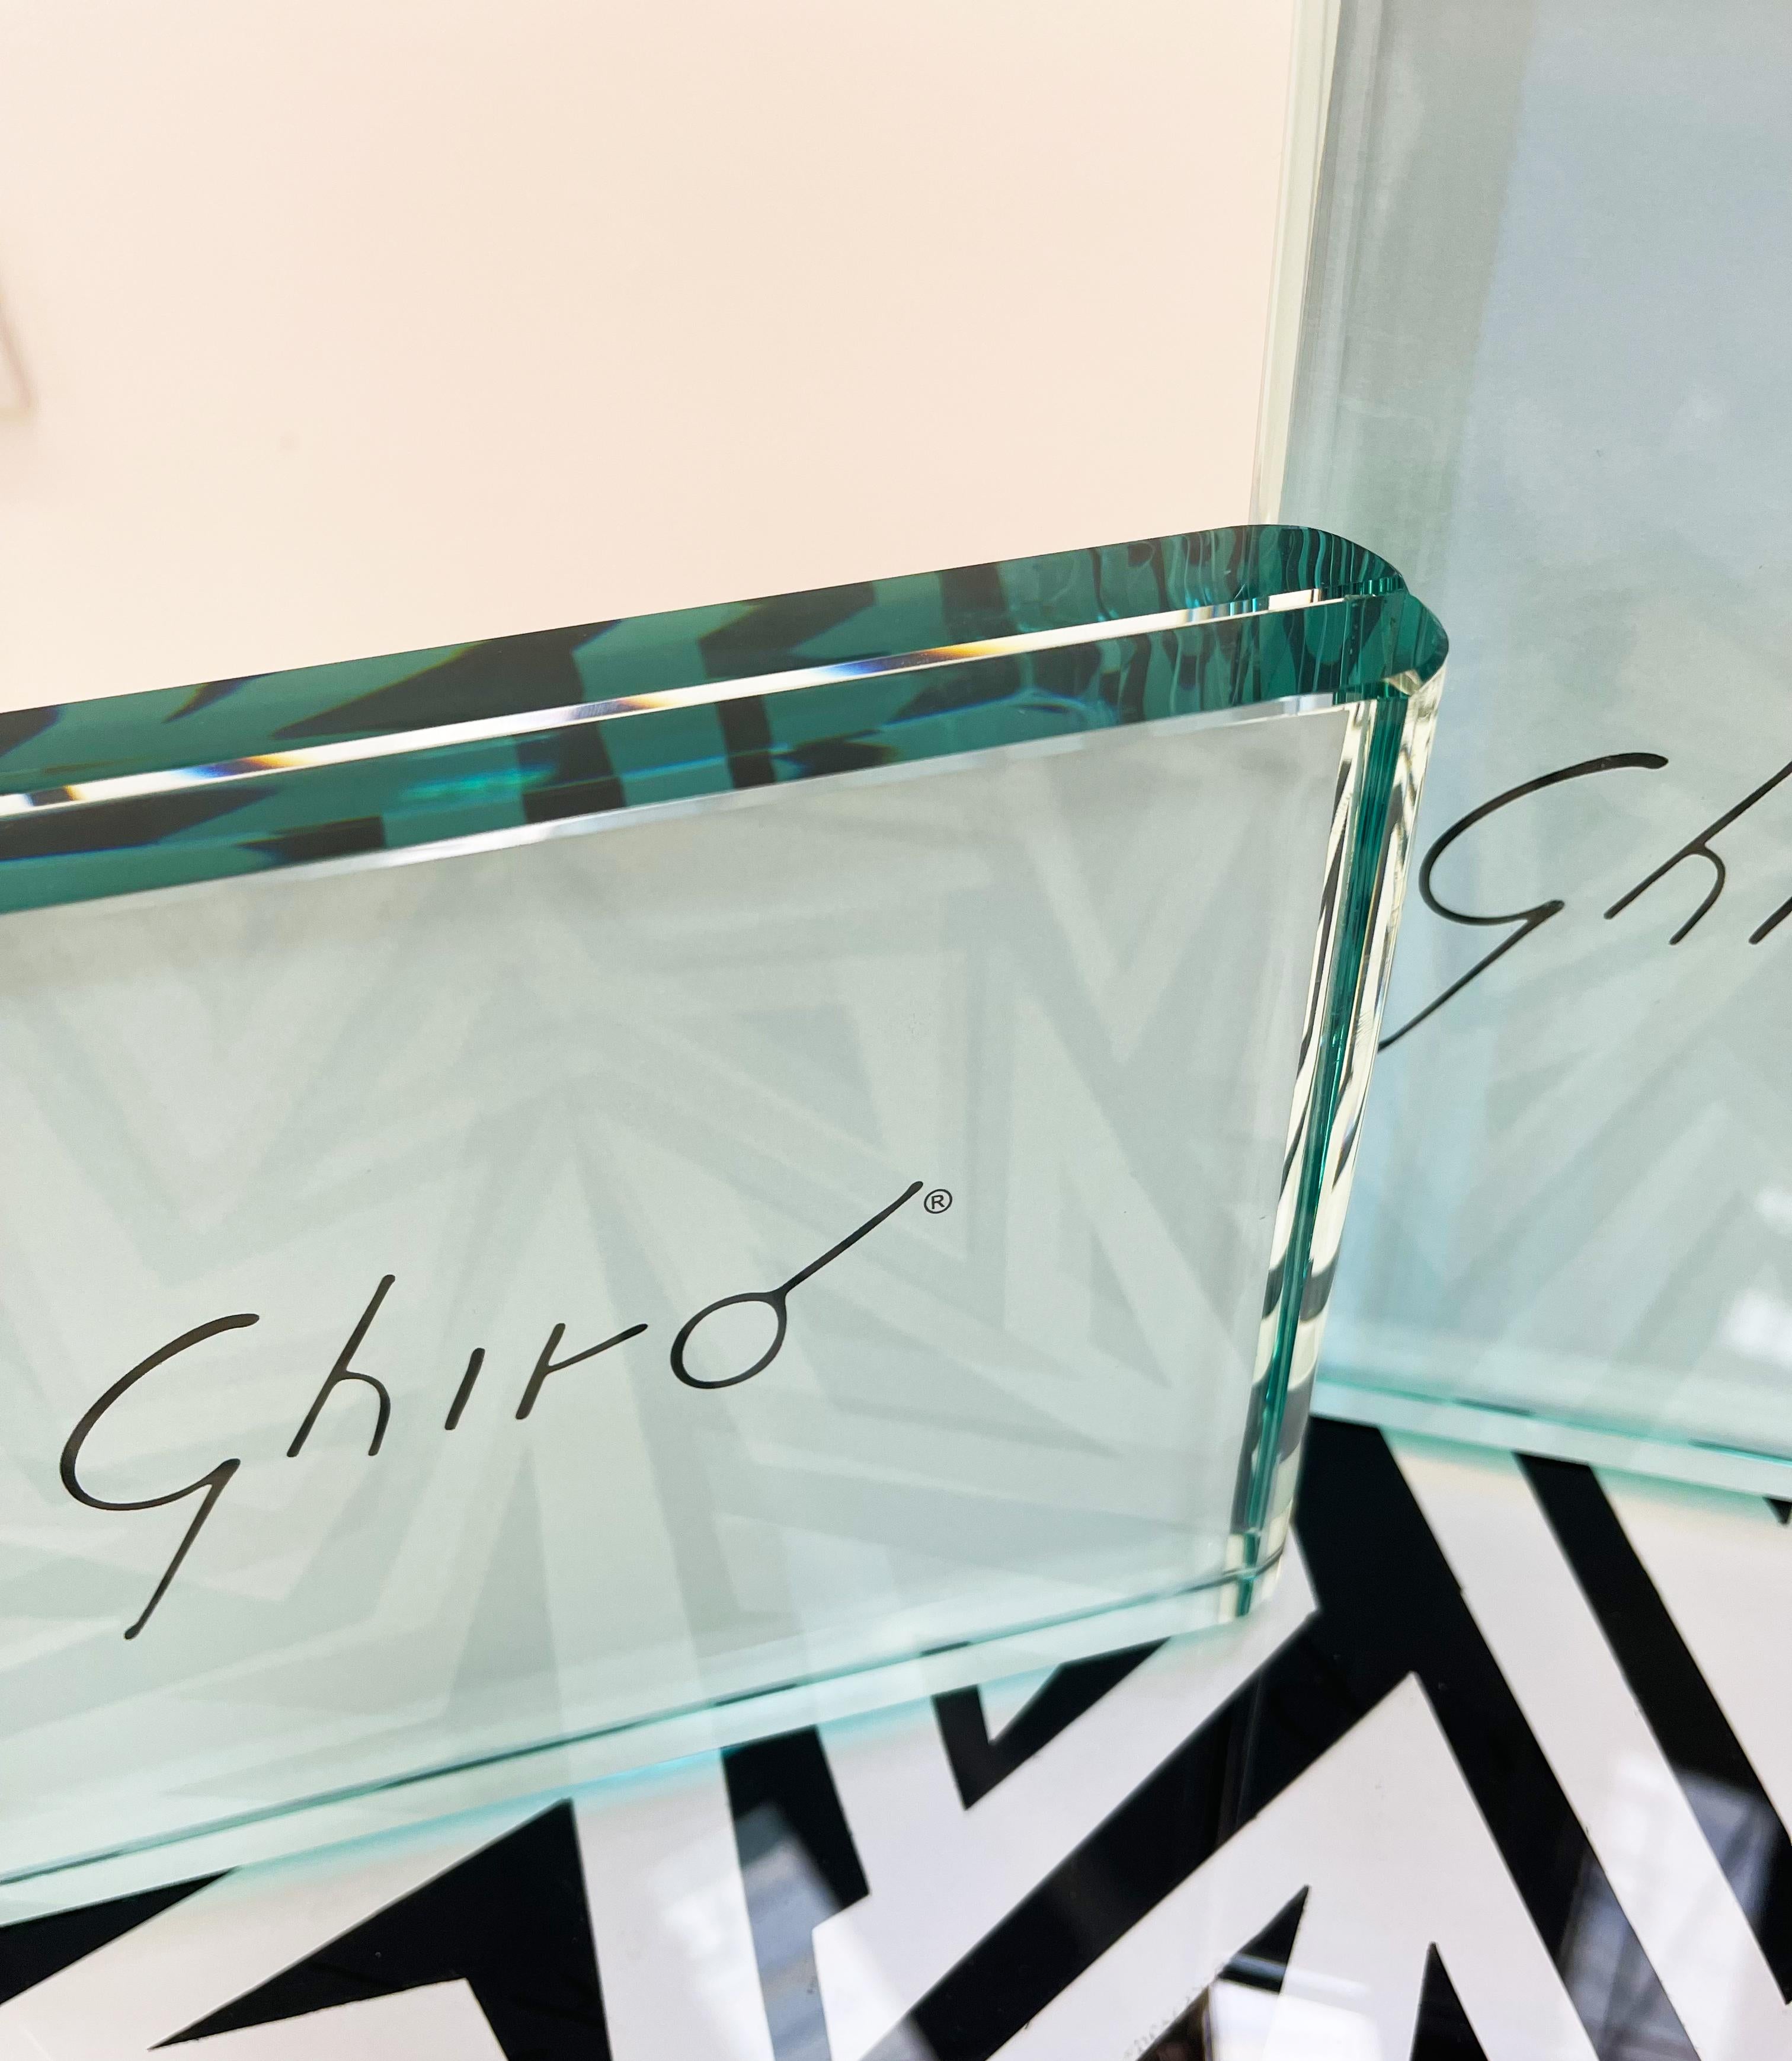 Contemporary Set of Two Handmade Aquamarine Crystal Photo Frames by Ghirò Studio For Sale 2